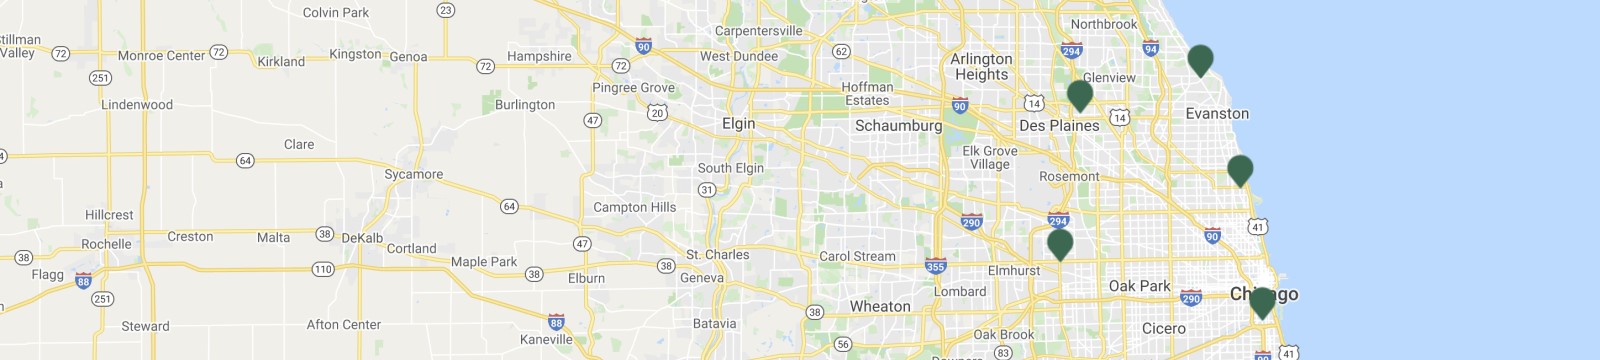 Google Map shows INBK's 5 locations in Great Chicago Area.